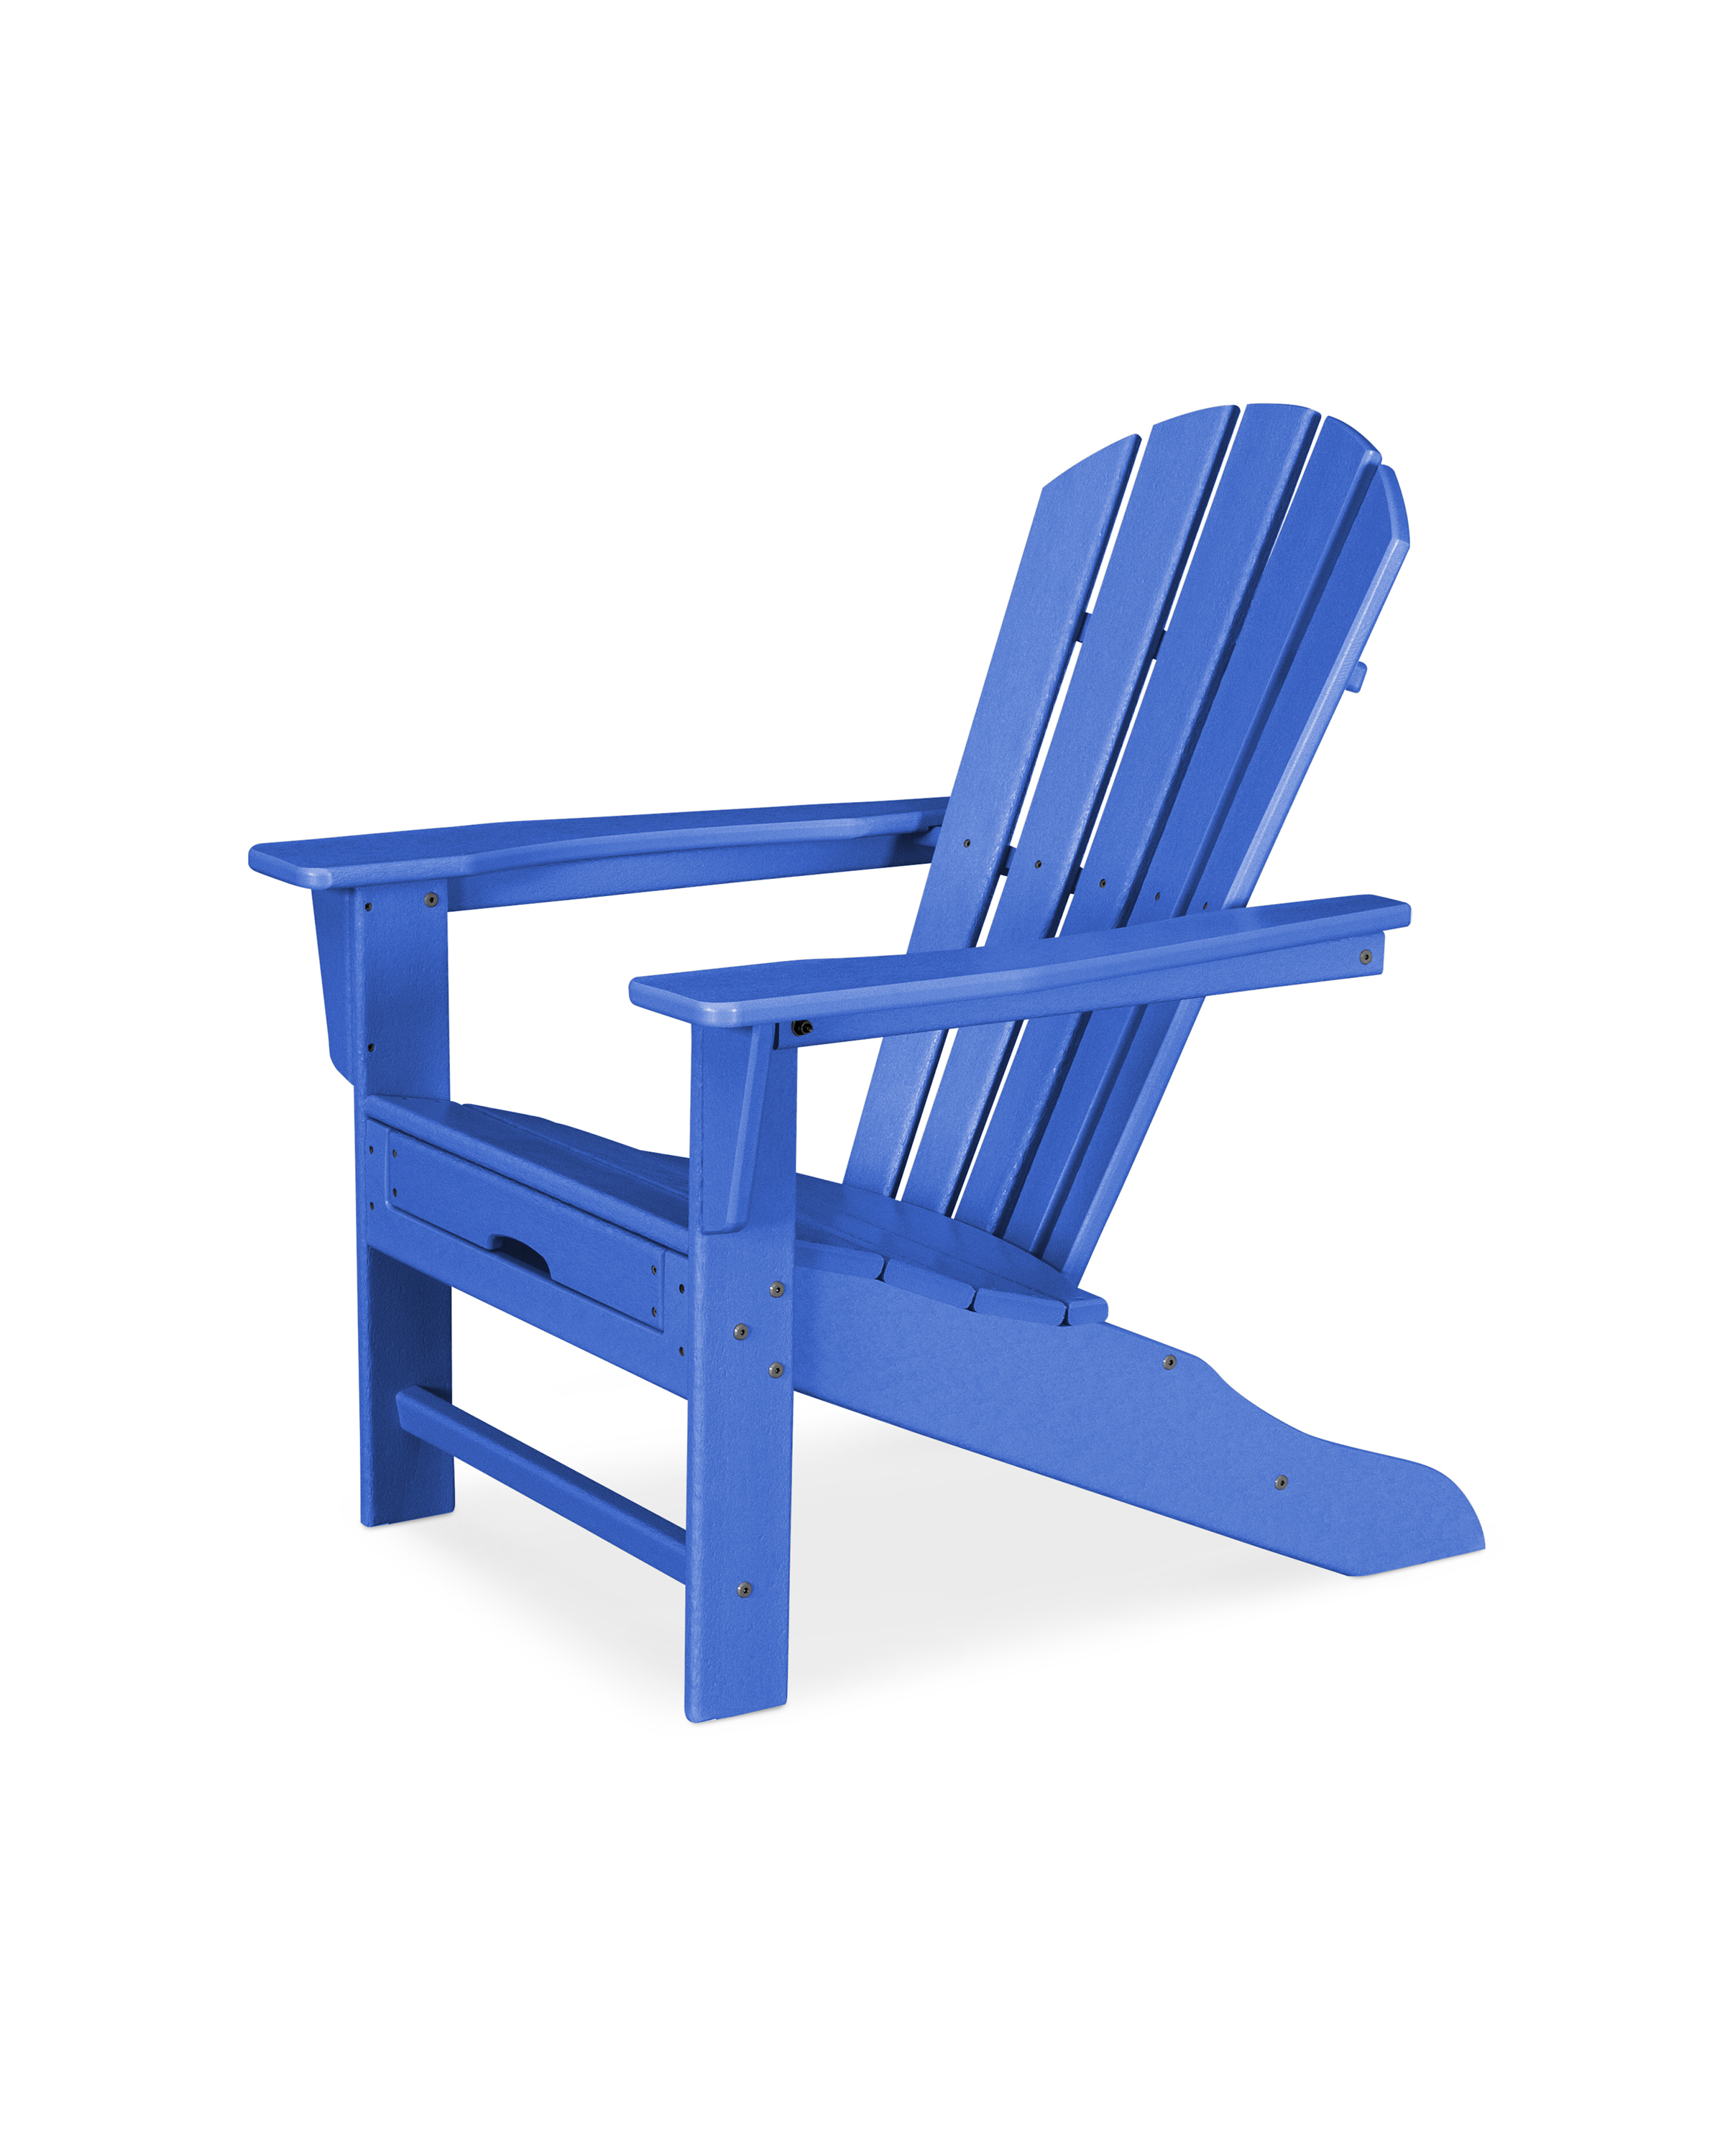 palm coast ultimate adirondack with hideaway ottoman in pacific blue thumbnail image